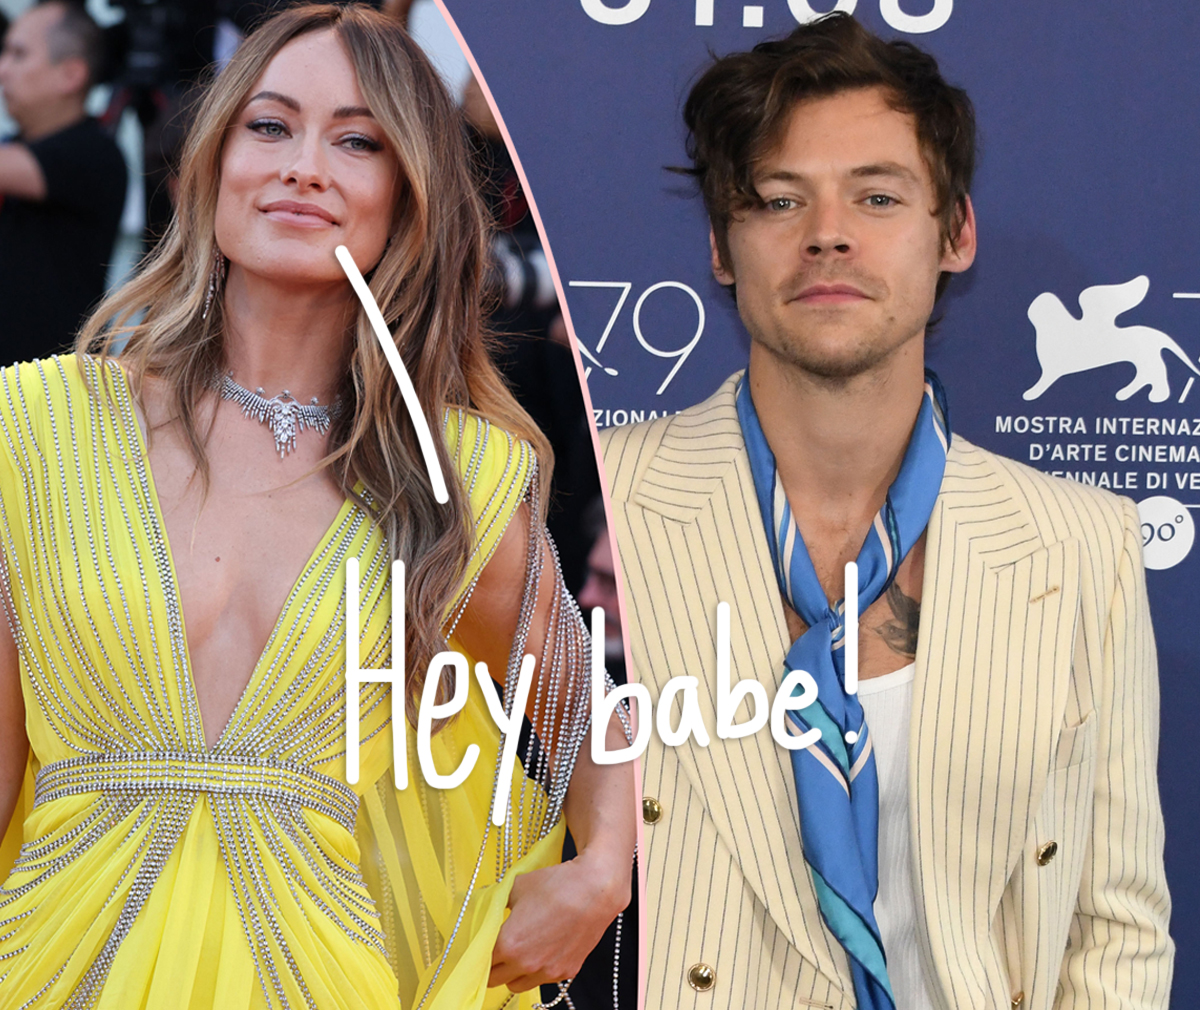 #Harry Styles & Olivia Wilde Step Out For A Date Night In New York Amid Split Rumors!